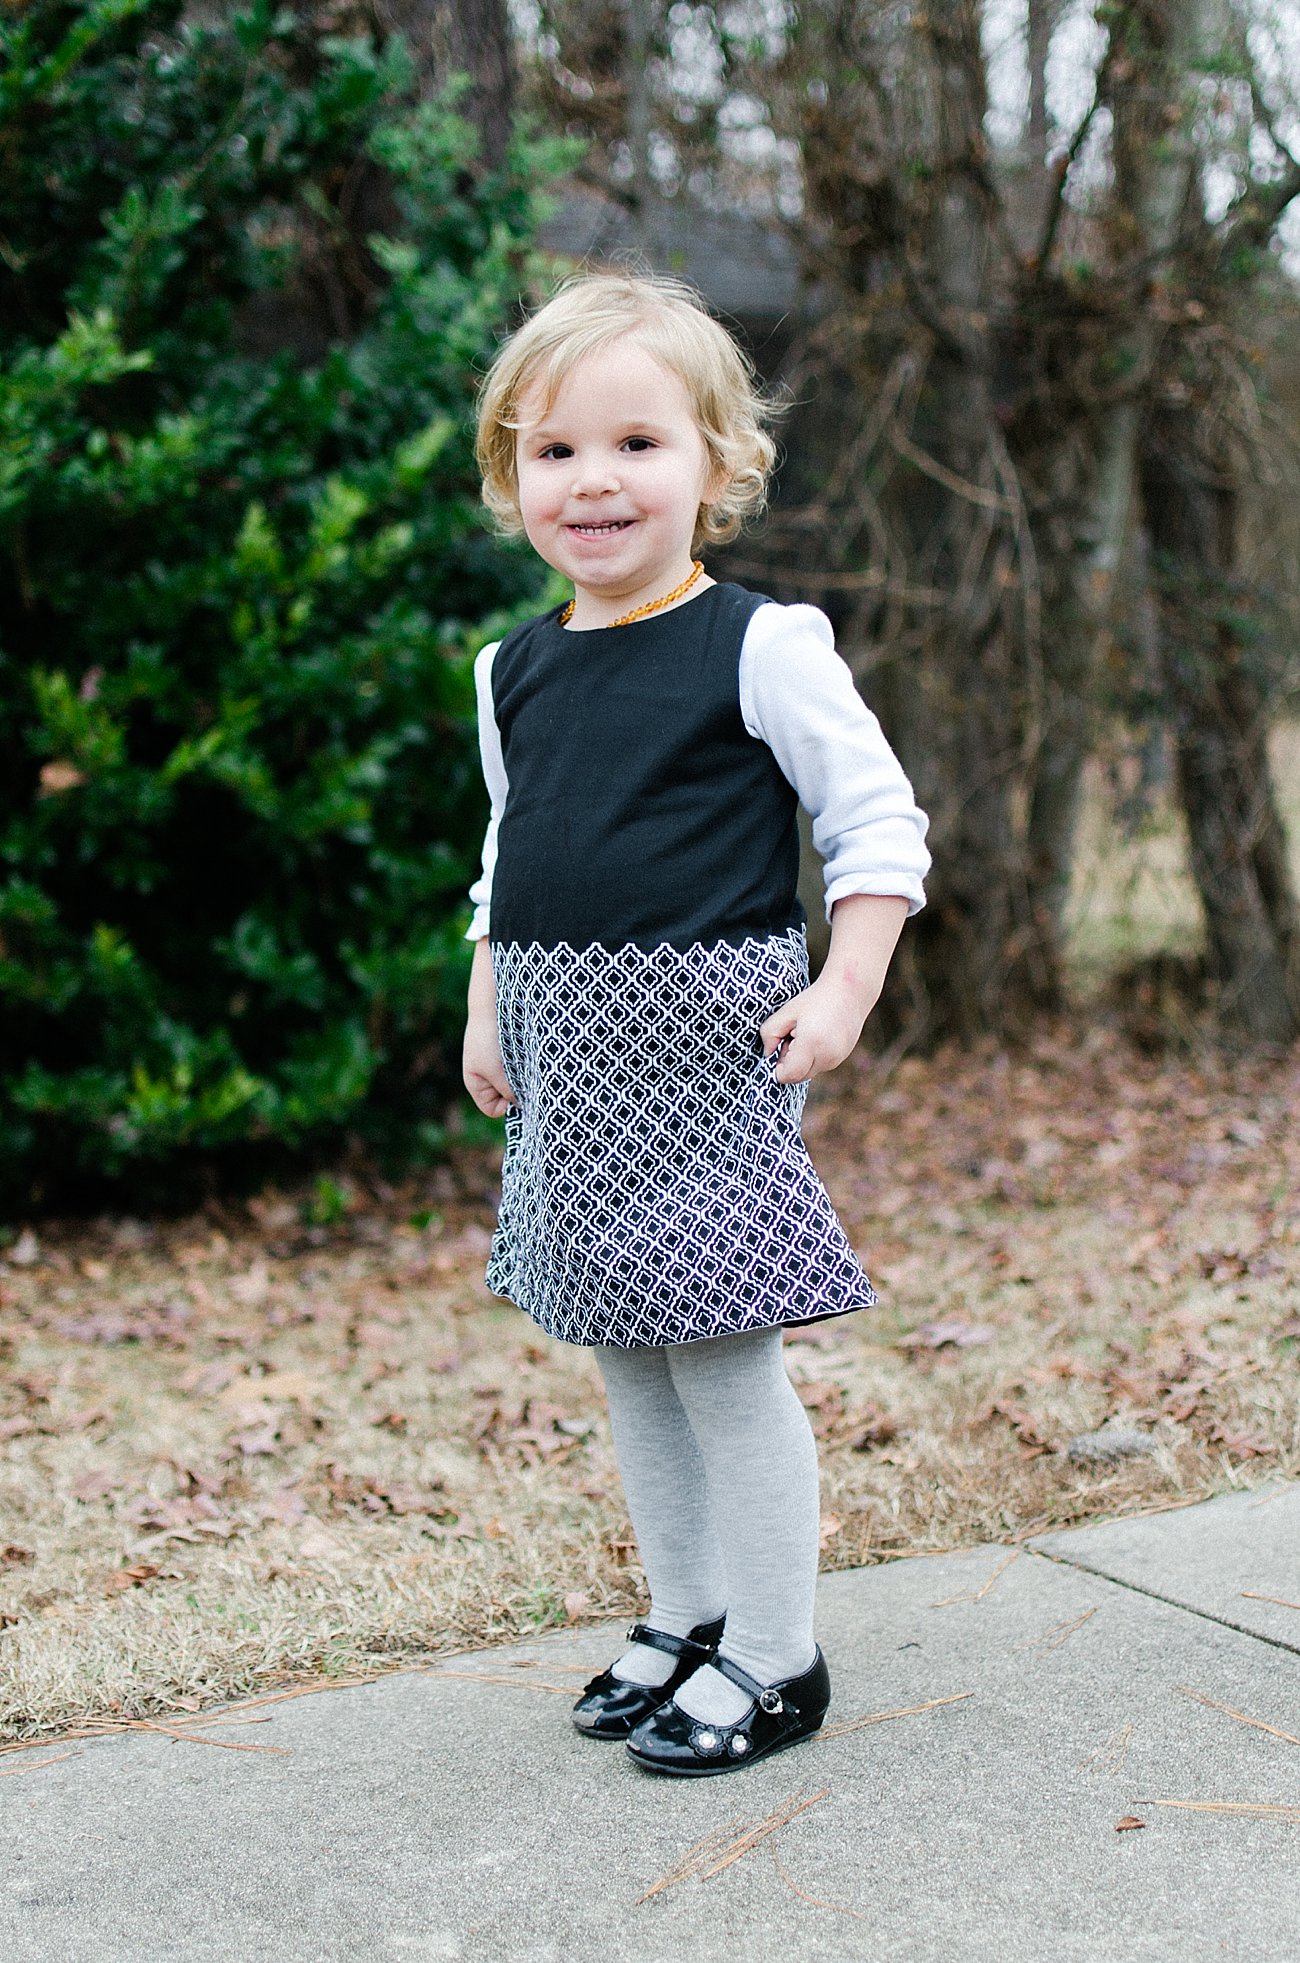 The Perfect Fair Trade Fashion Giveaway for the Little Girl in Your Life by ethical fashion blogger Still Being Molly